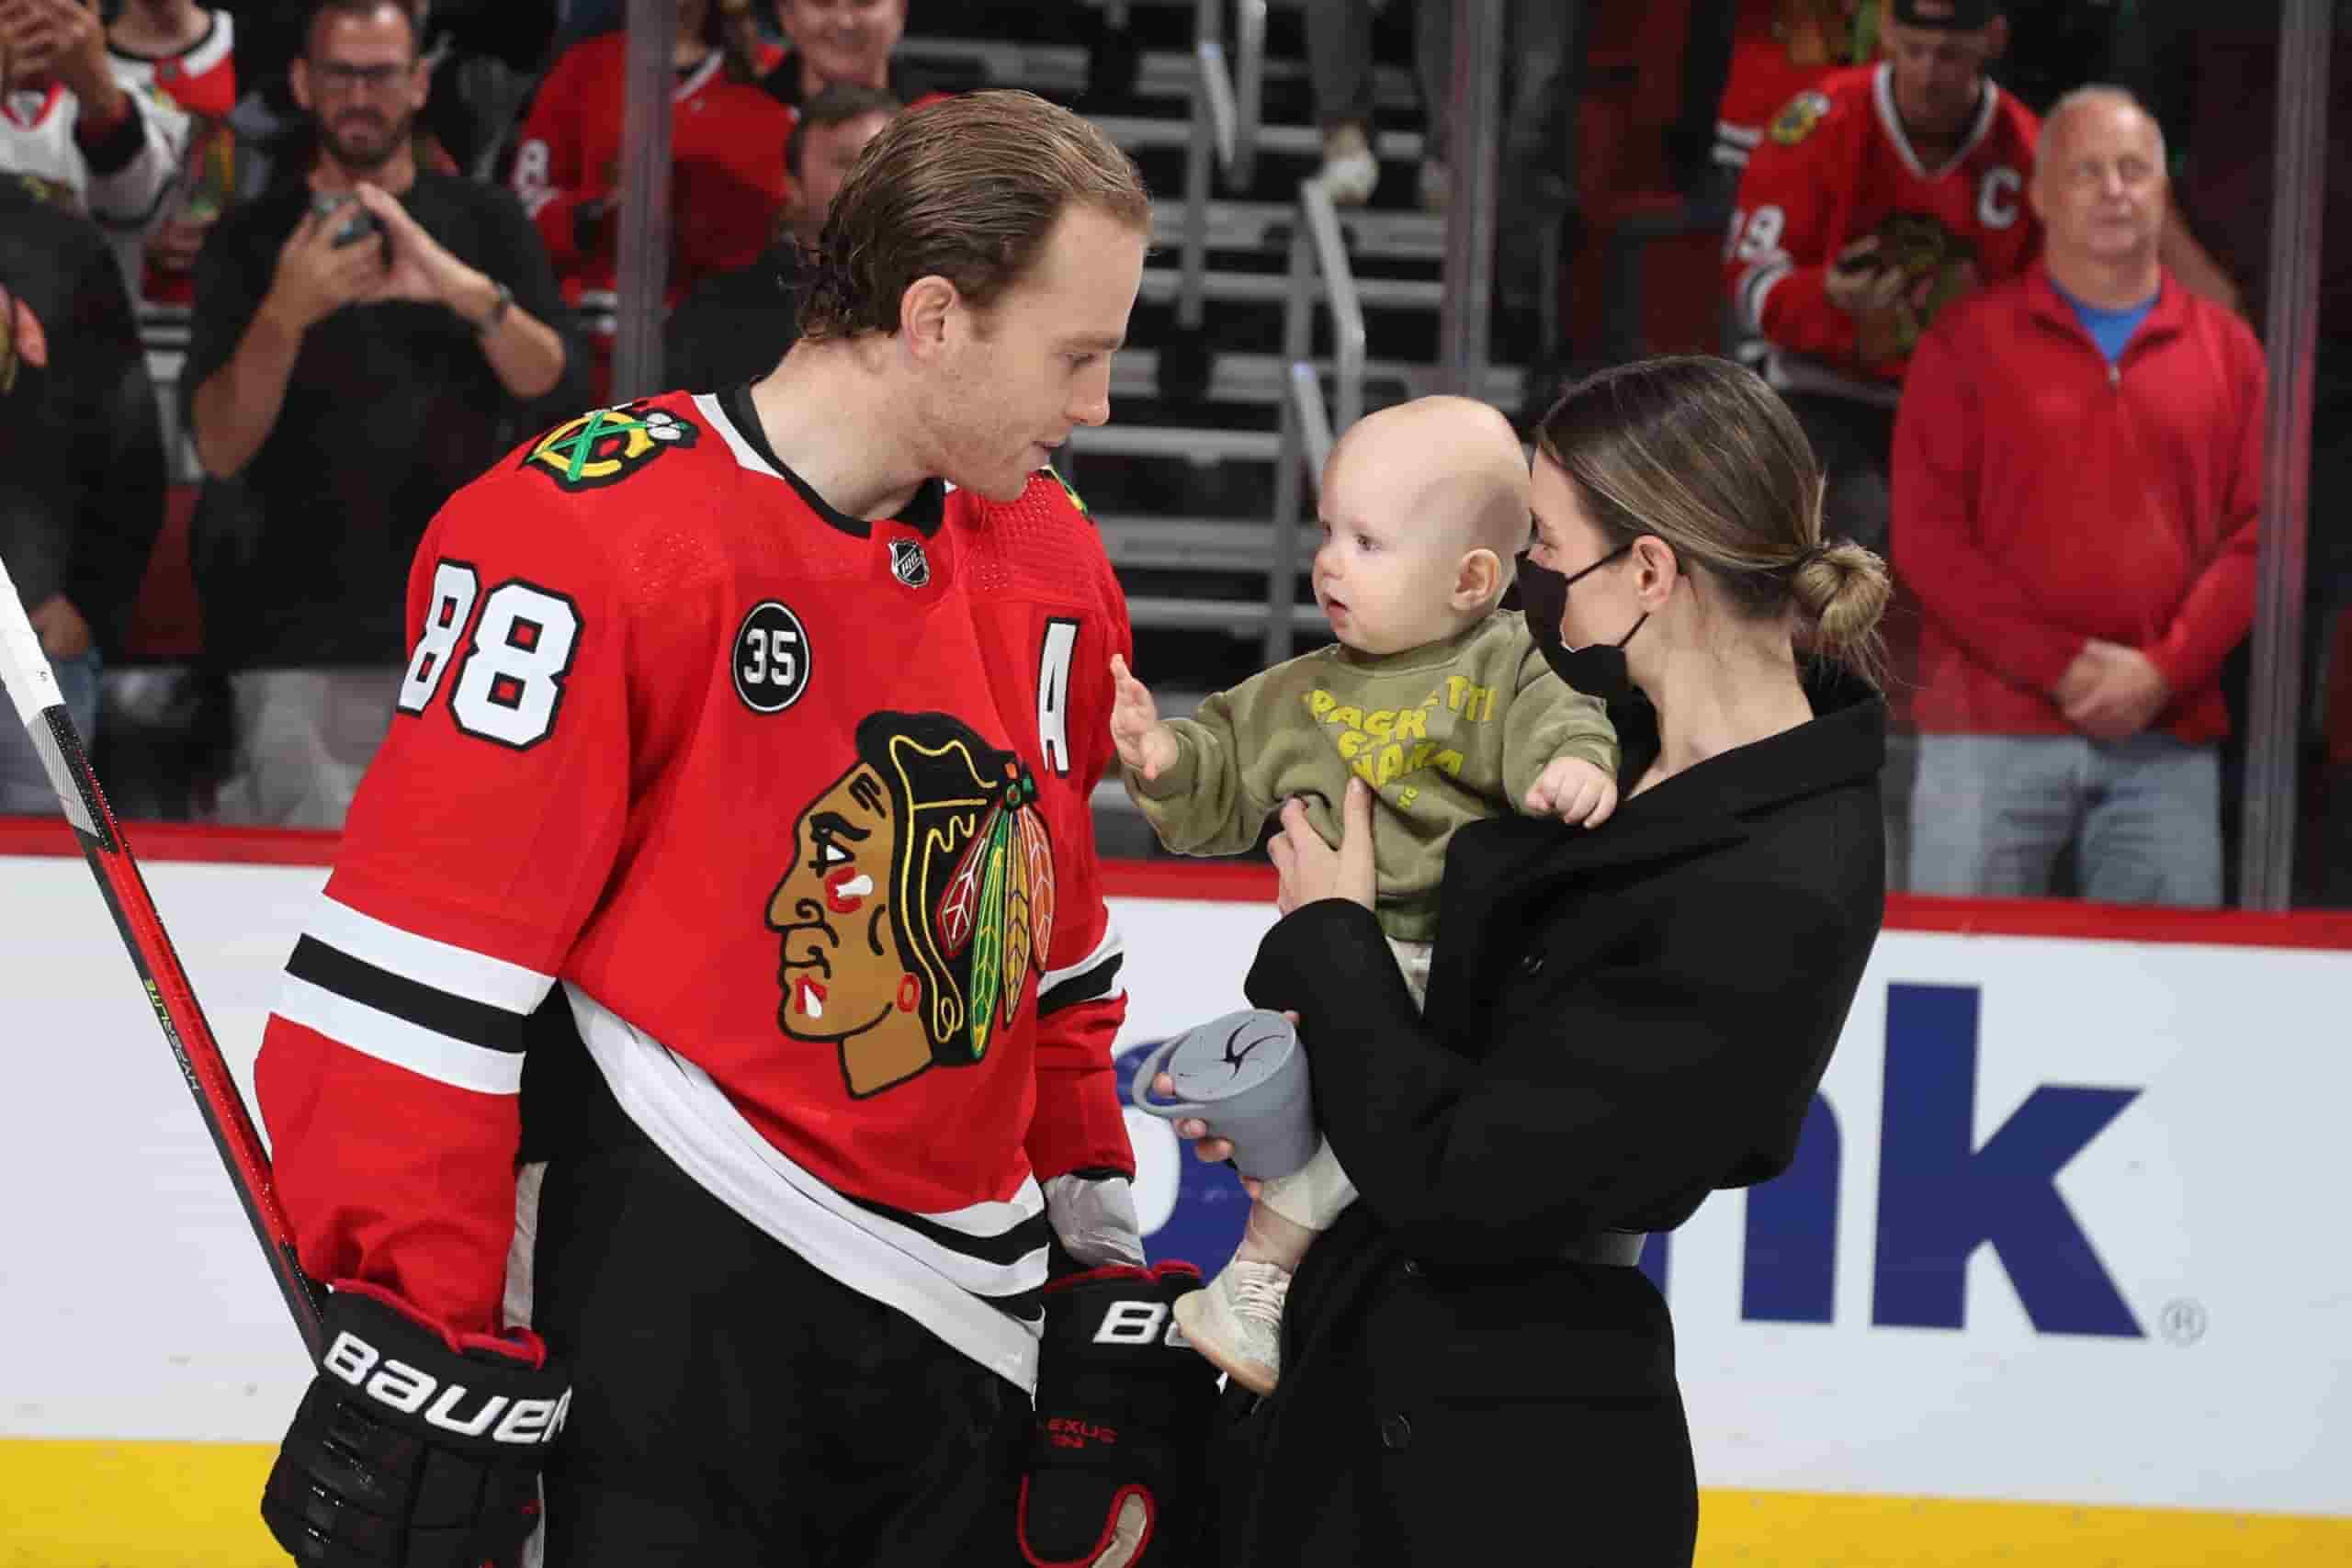 Image of Patrick Kane with his wife, Amanda Grahovec, and their son